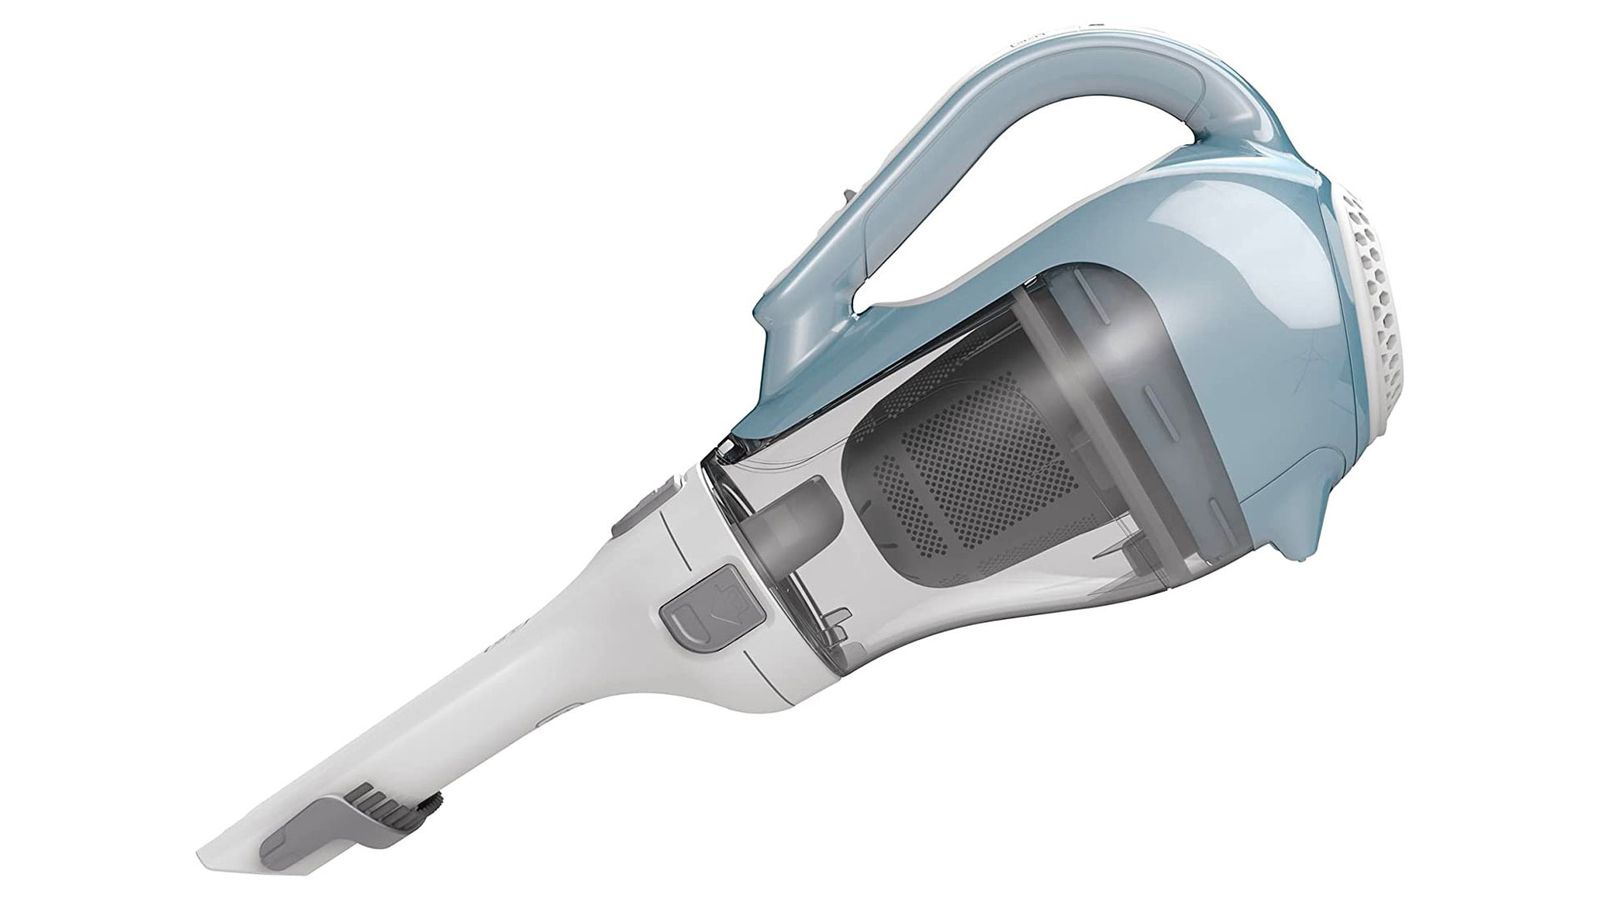 BLACK+DECKER Dustbuster AdvancedClean CHV1410L product image of a light blue, grey, and white handheld device.